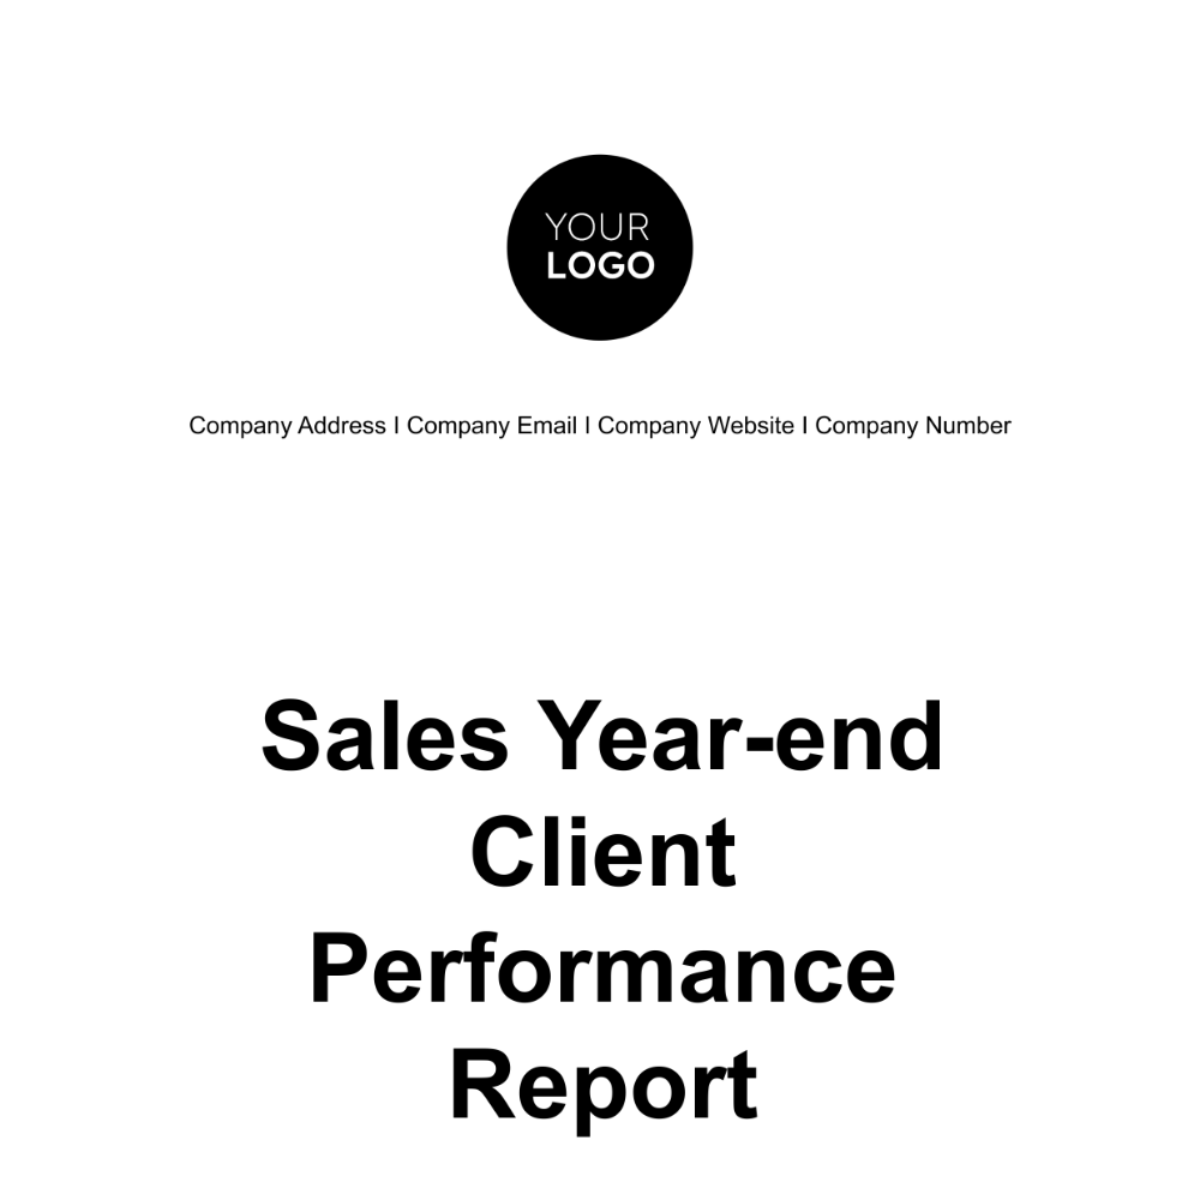 Sales Year-end Client Performance Report Template